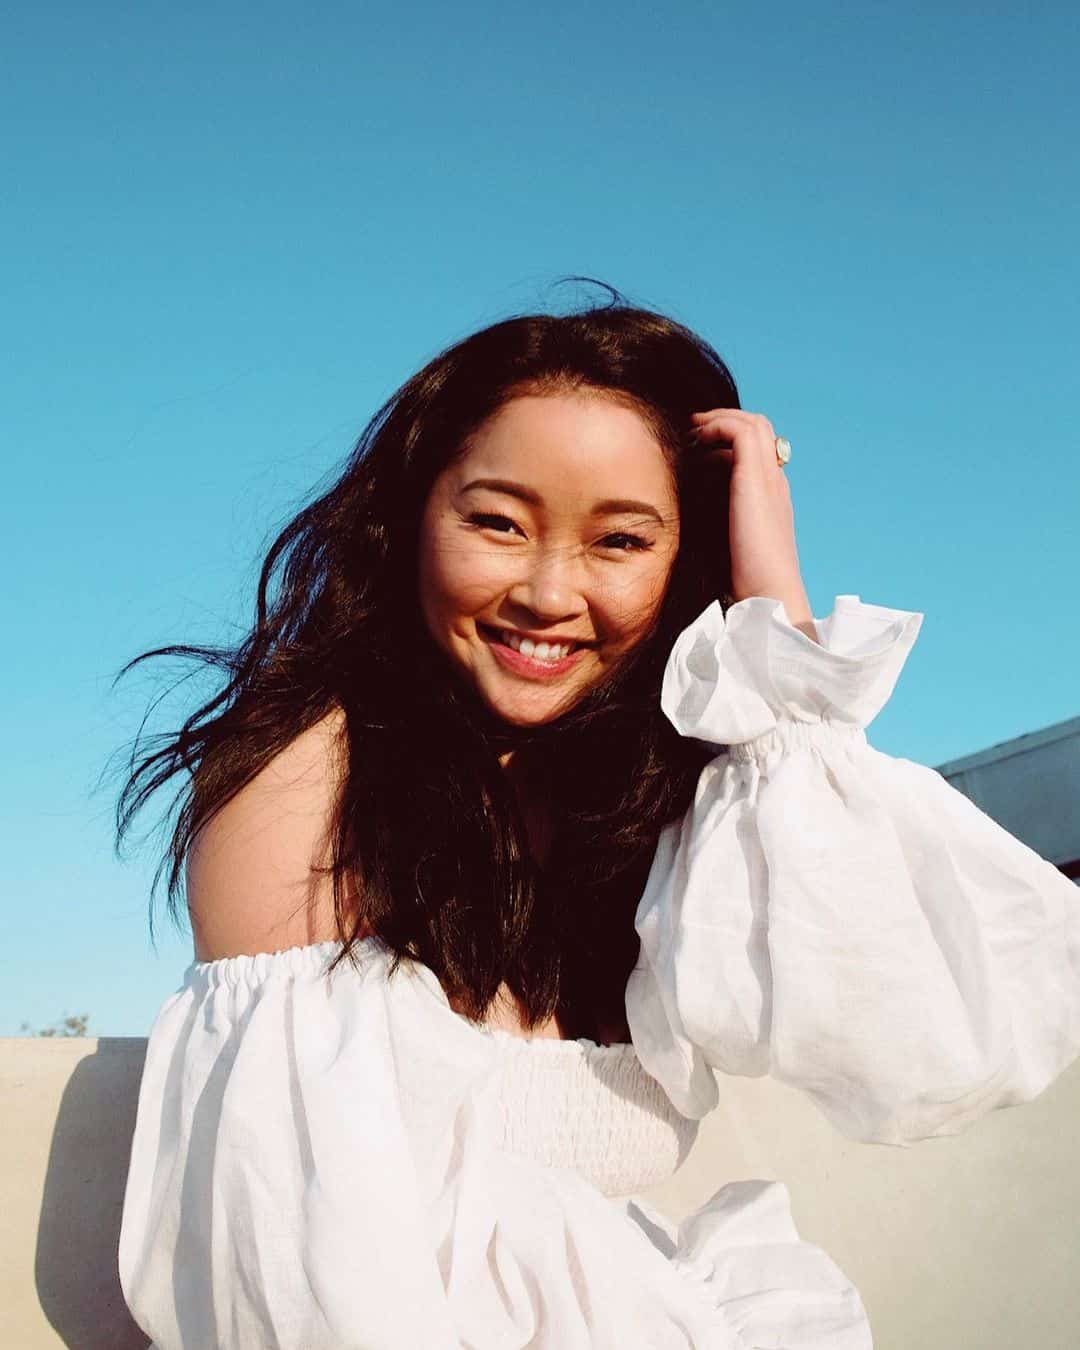 Lana Condor - Biography, Profile, Facts, and Career